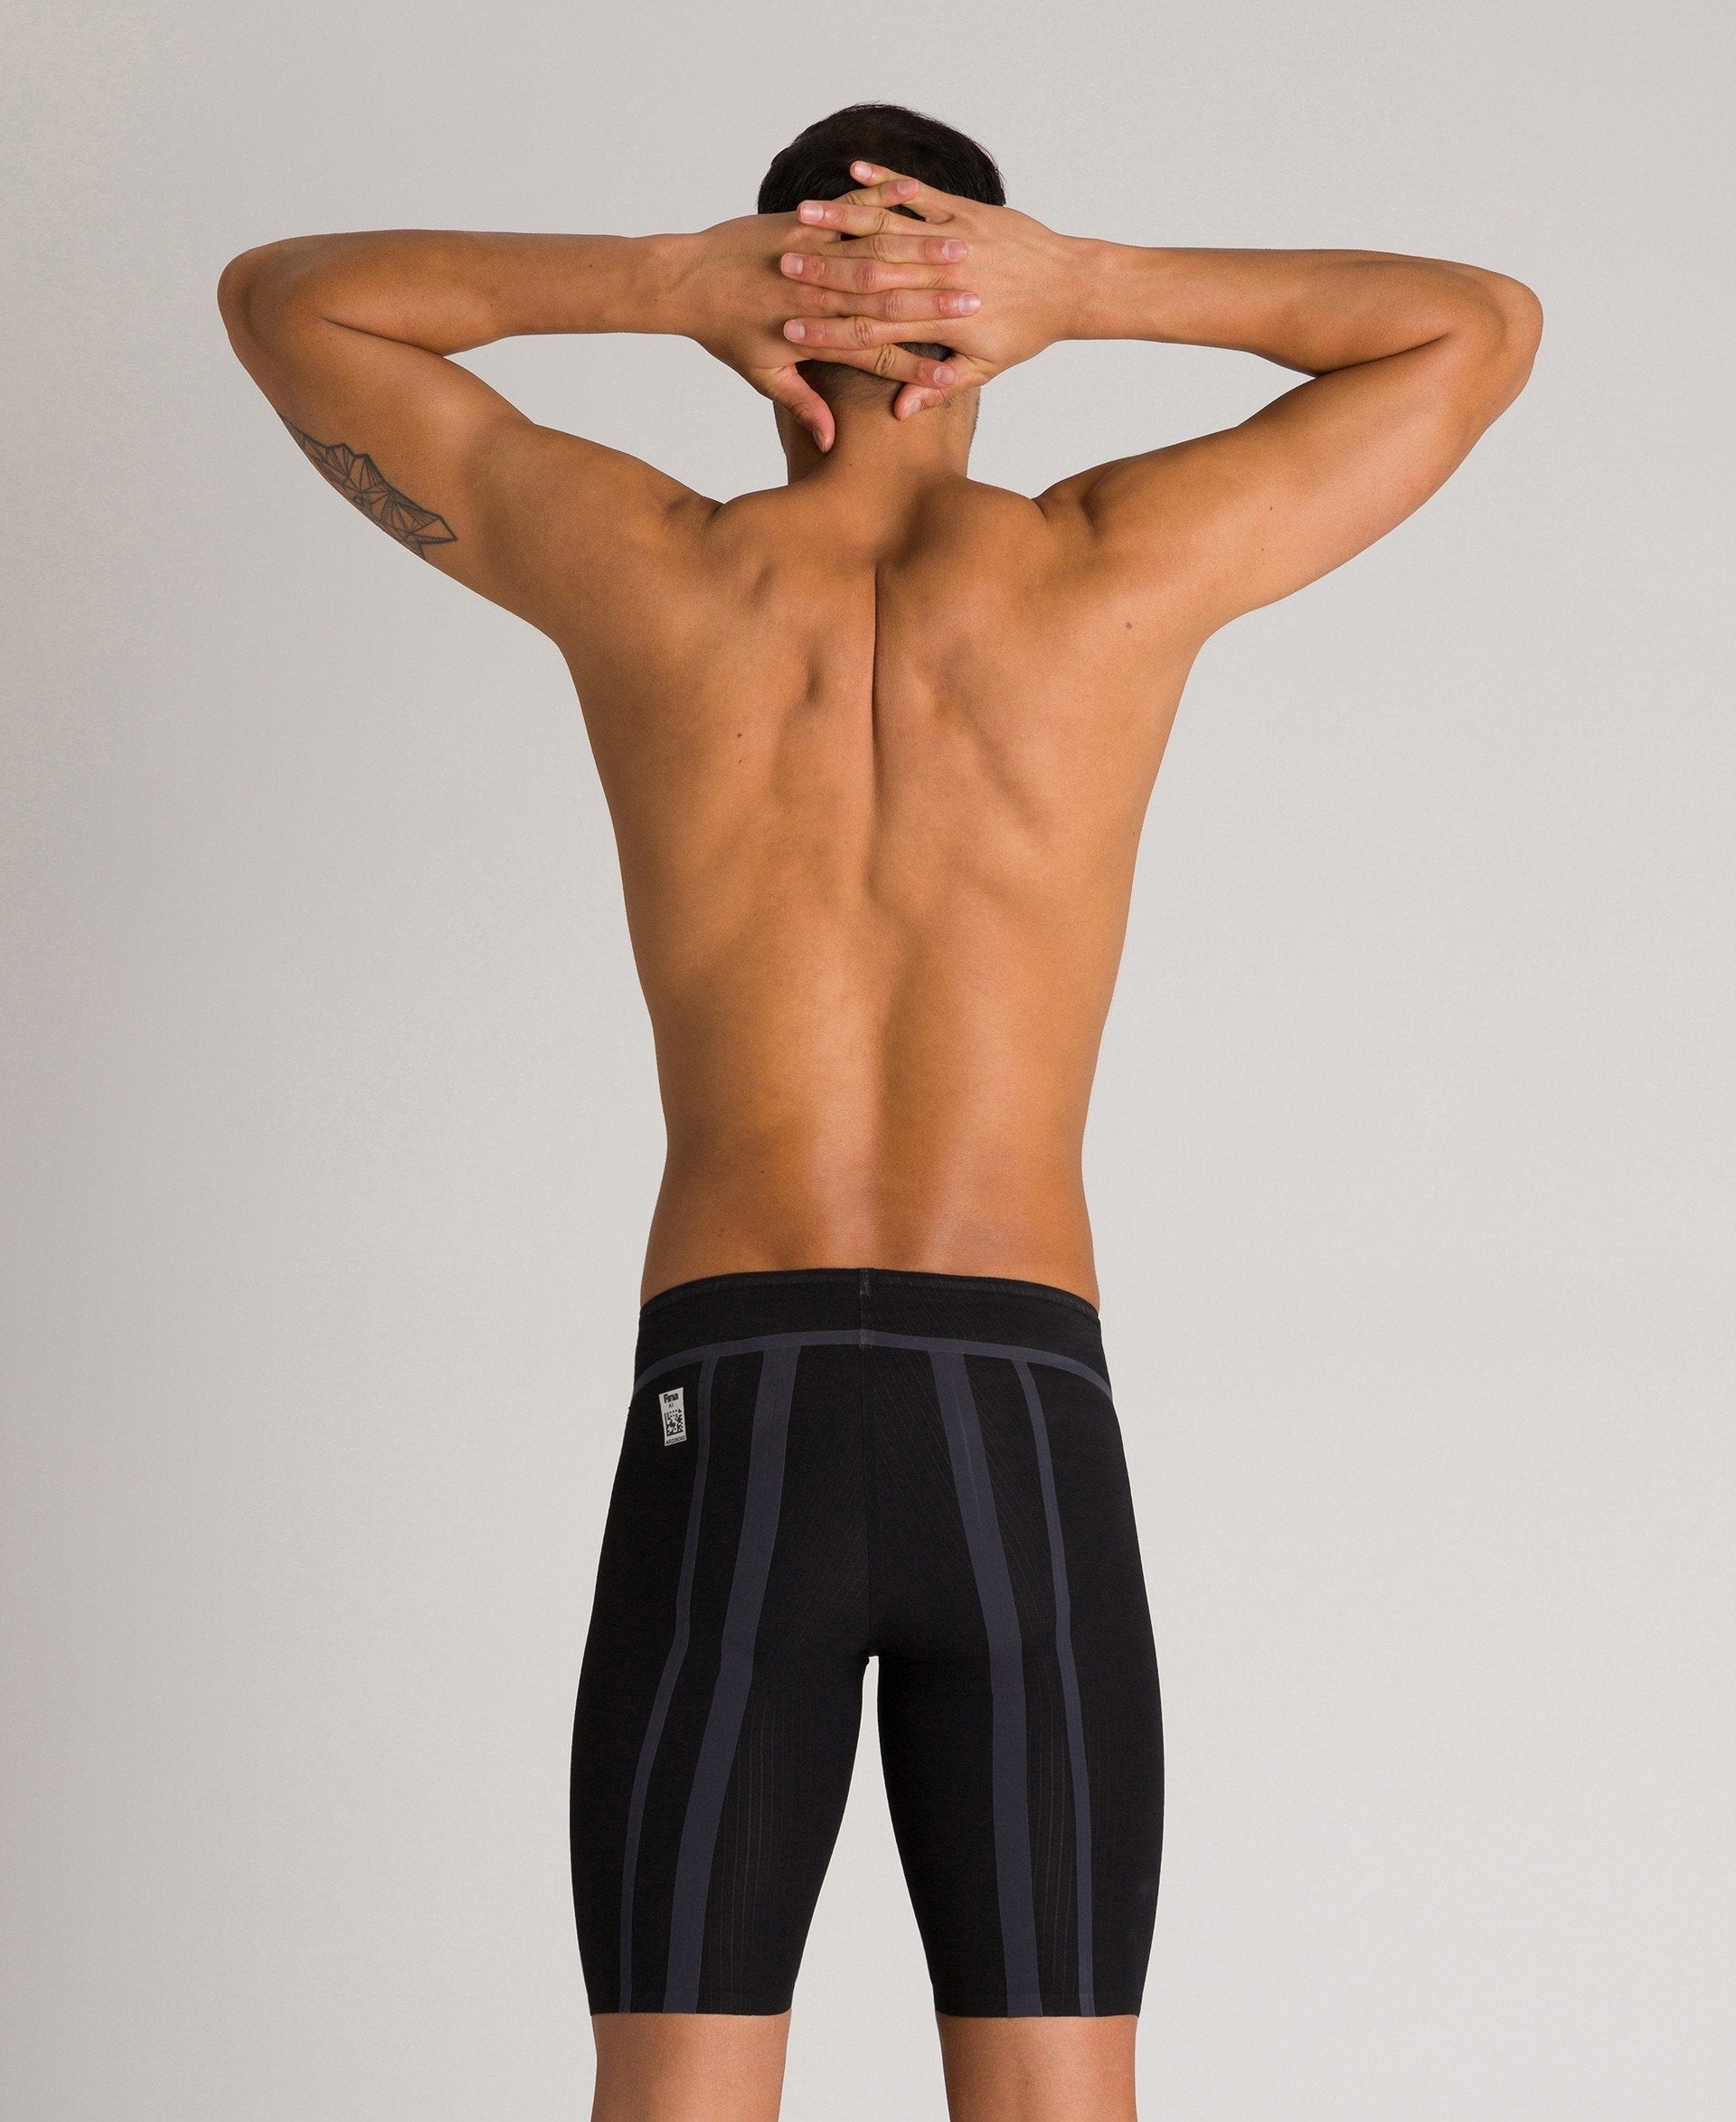 MEN POWERSKIN CARBON-CORE FX JAMMER – FINA APPROVED